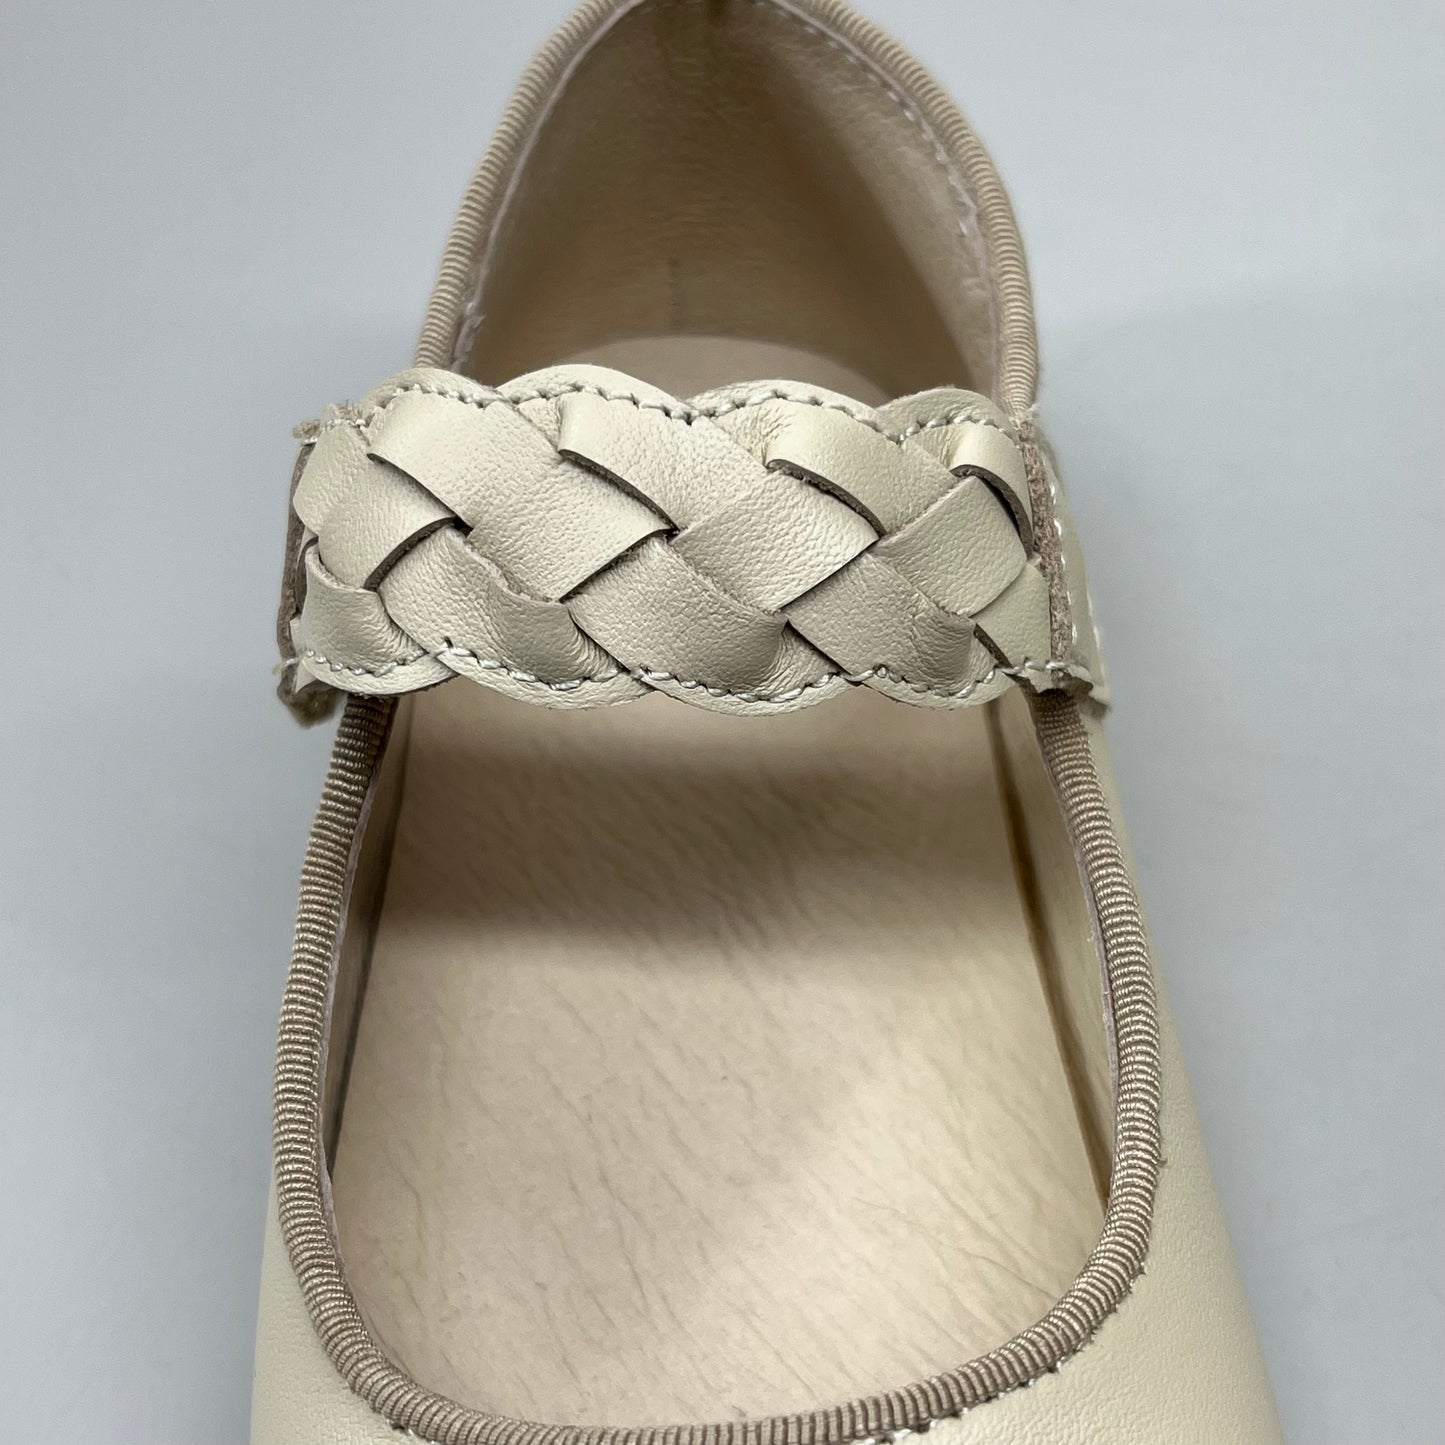 OLD SOLES Lady Plat Braided Strap Leather Shoe Kid’s Sz 30 US 13 Cream #817